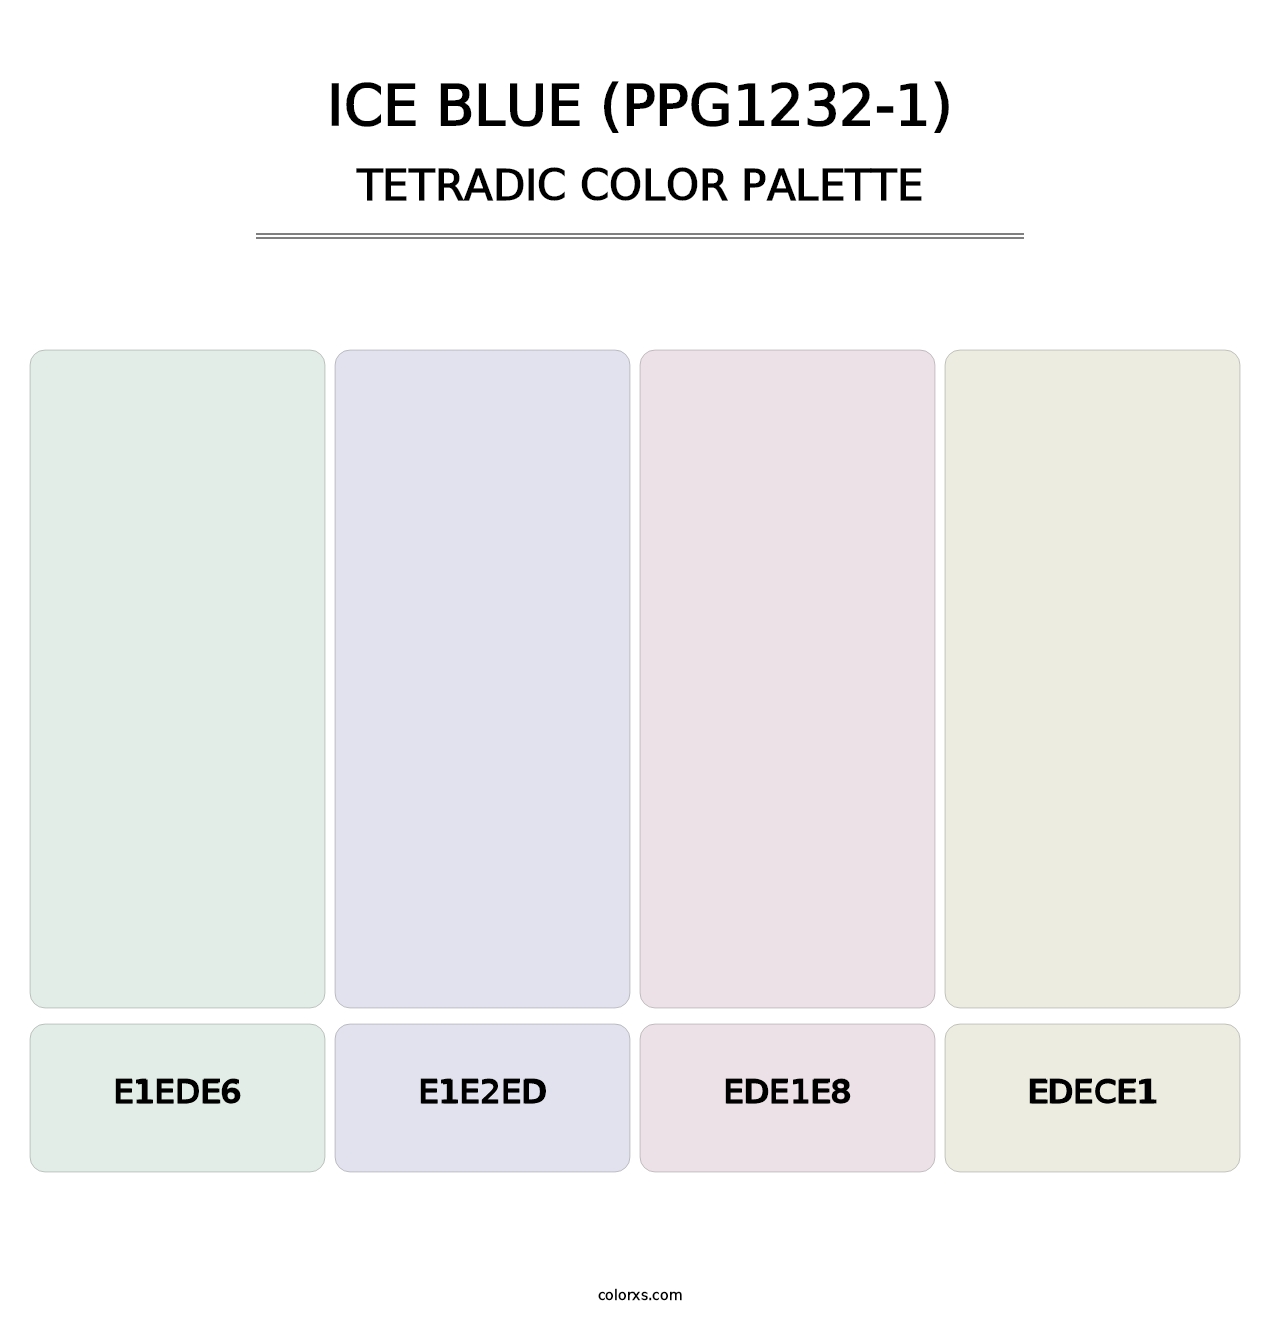 Ice Blue (PPG1232-1) - Tetradic Color Palette